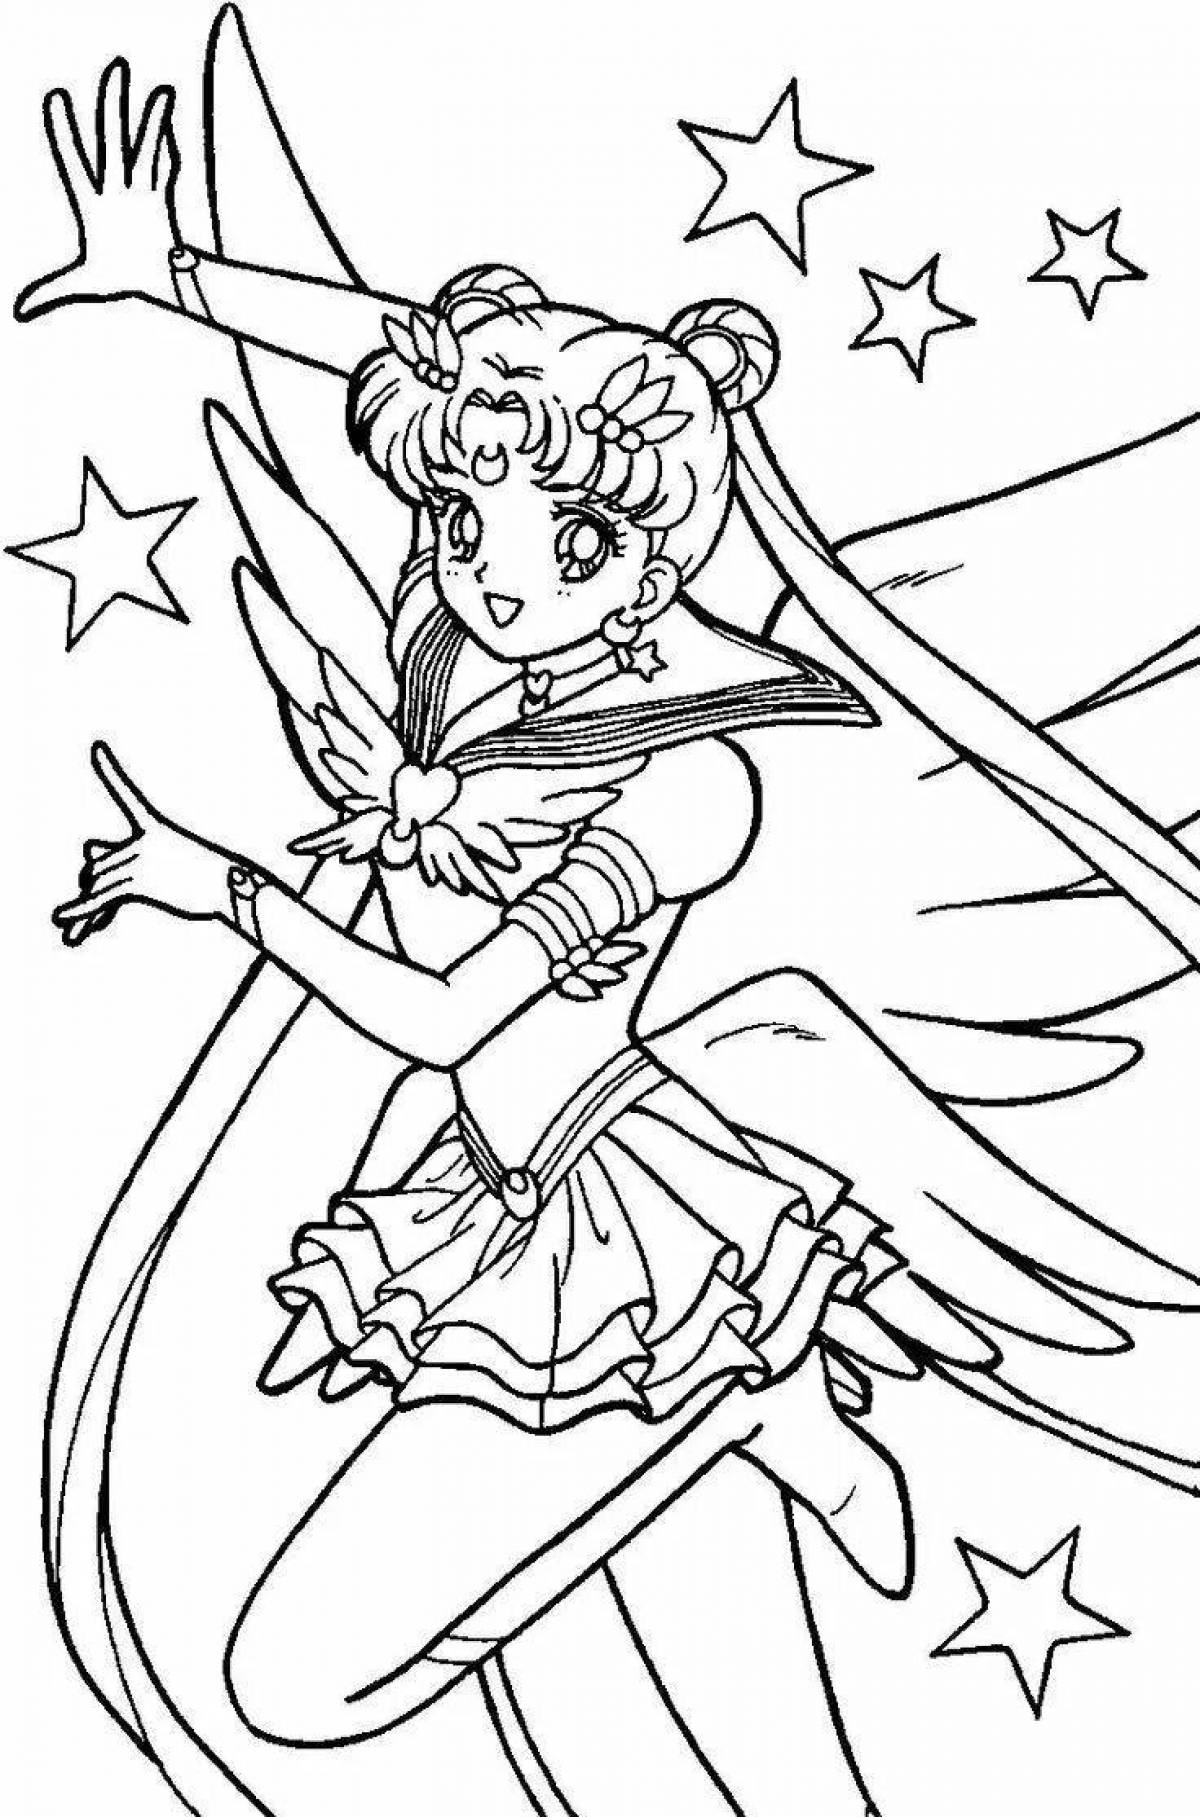 Charming coloring book for girls sailor moon